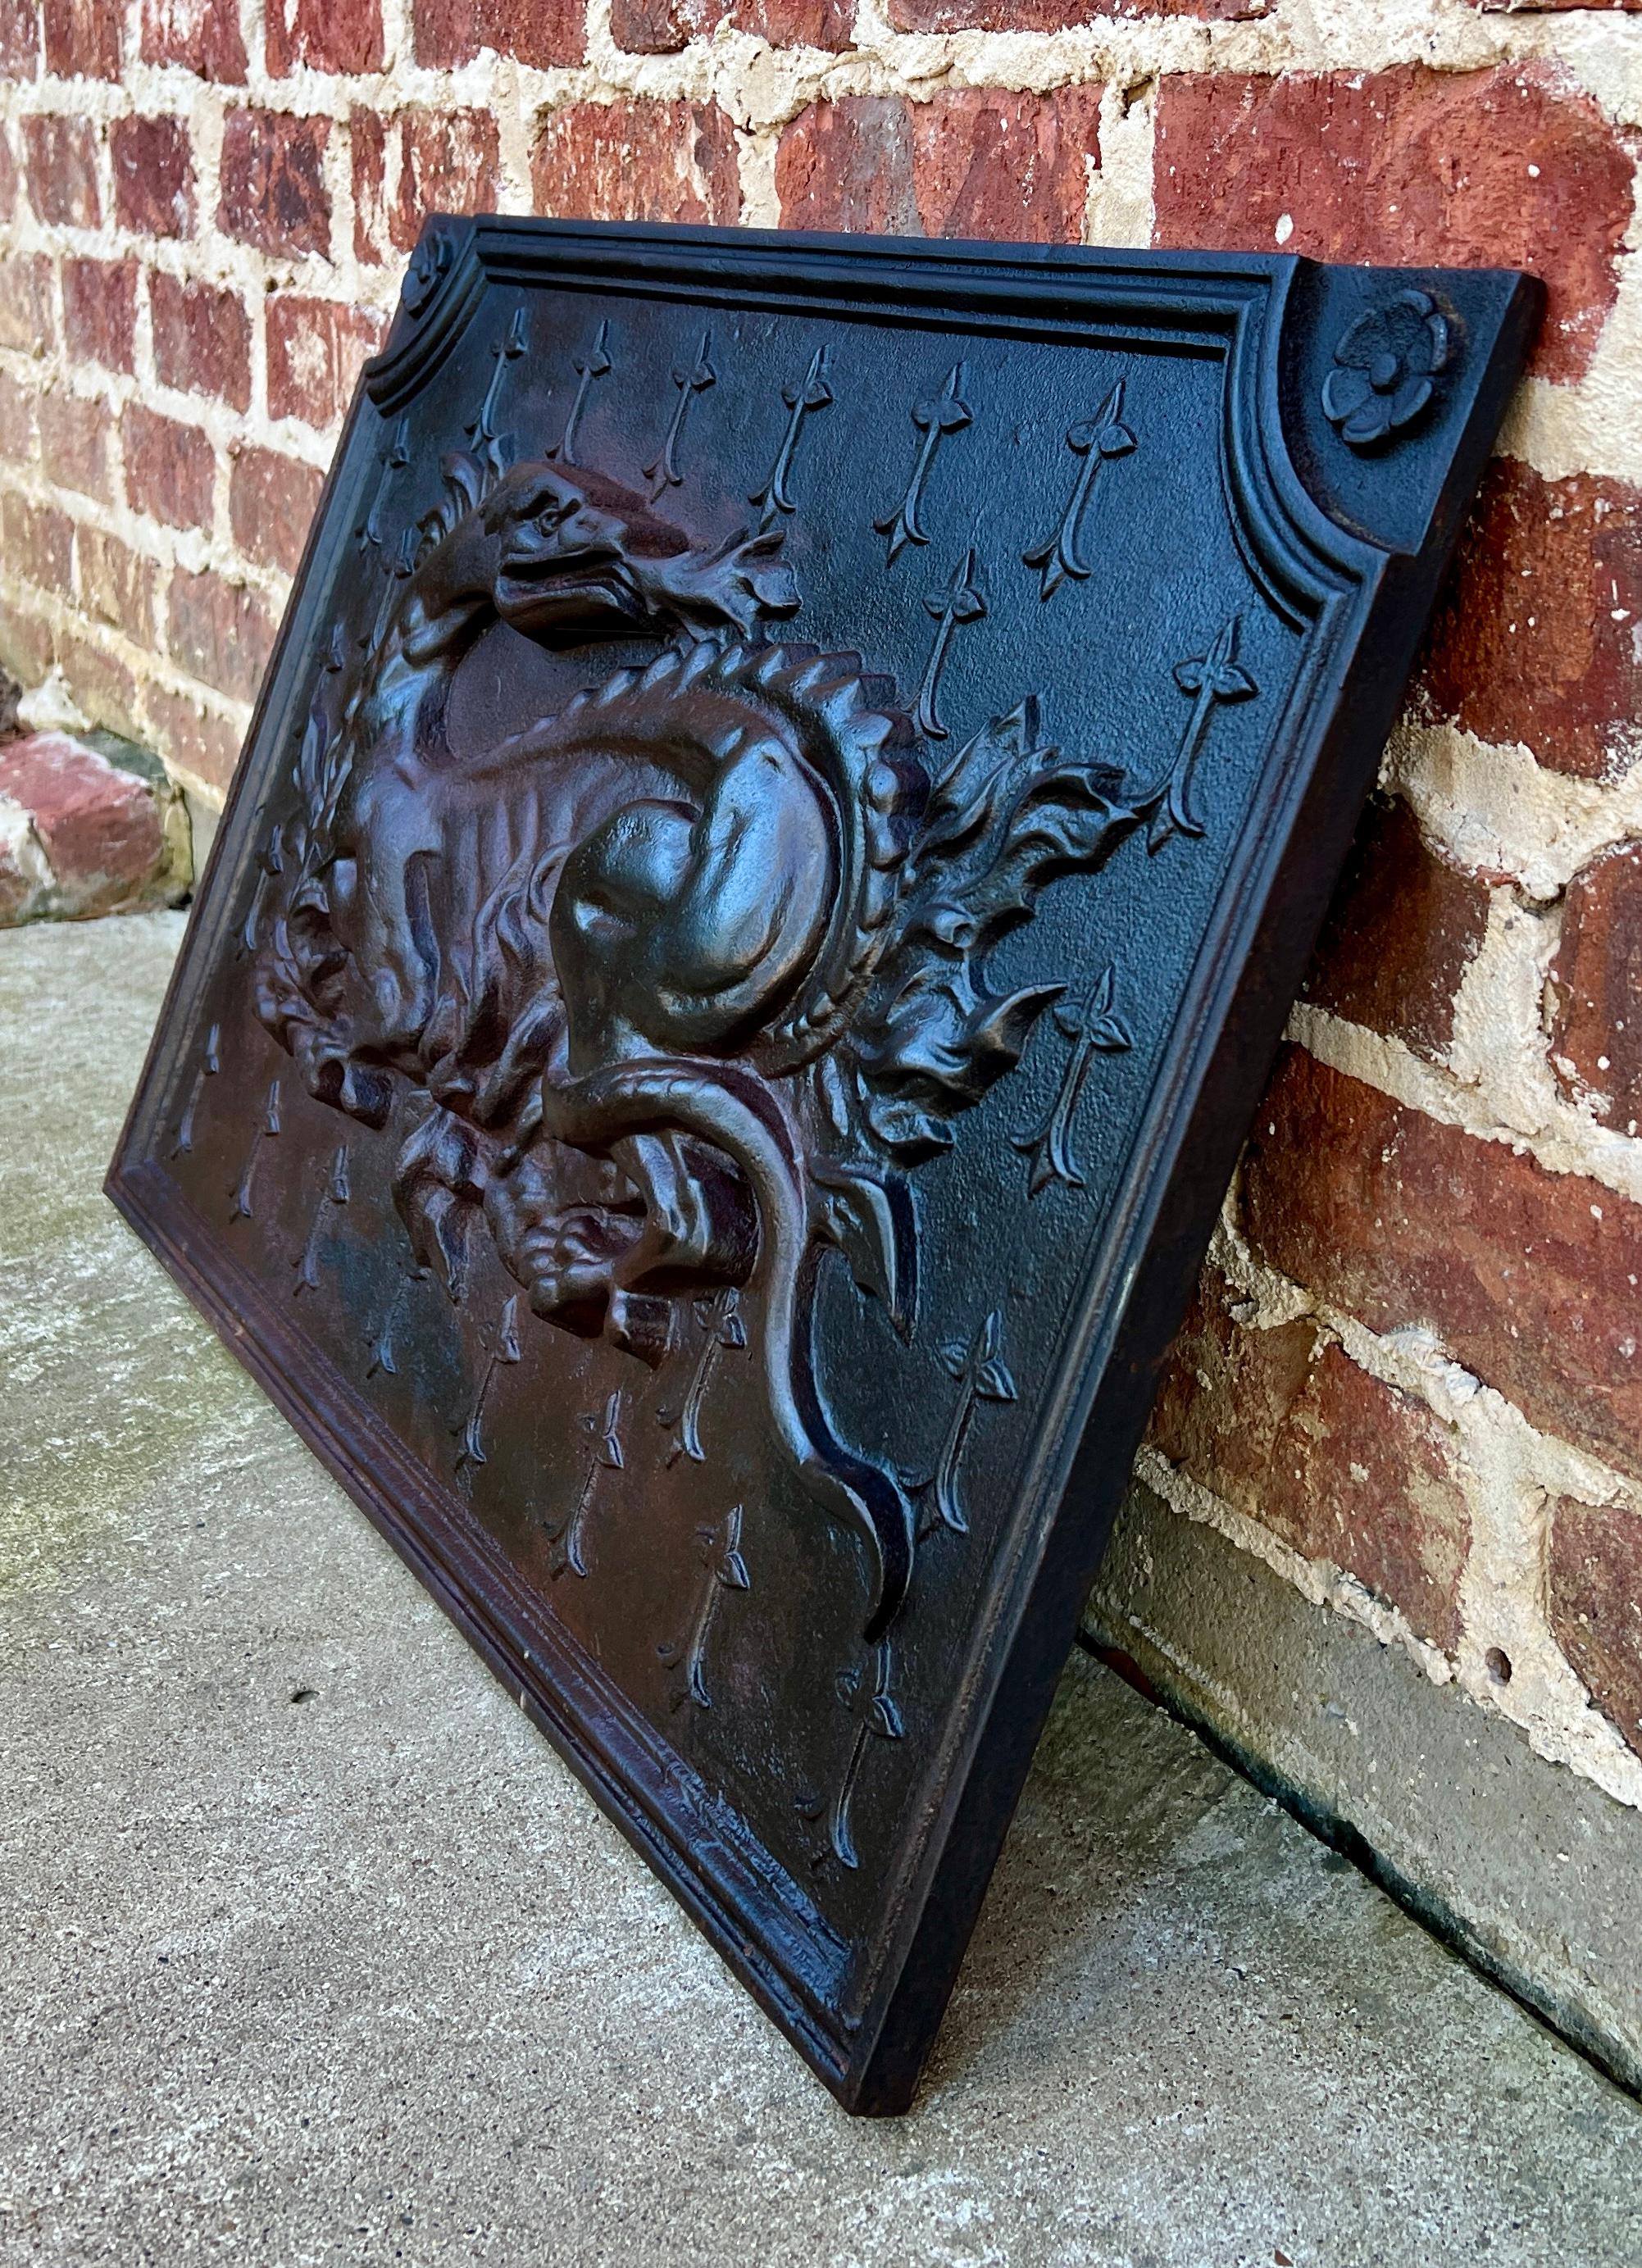 SUPERB and RARE Antique French Cast Iron Fireplace Fire Back ~~c. 1890s

This HANDSOME statement piece will add charm and character to your home or castle perfect for living area, bedroom, or even a large country kitchen fireplace or hearth~~expert